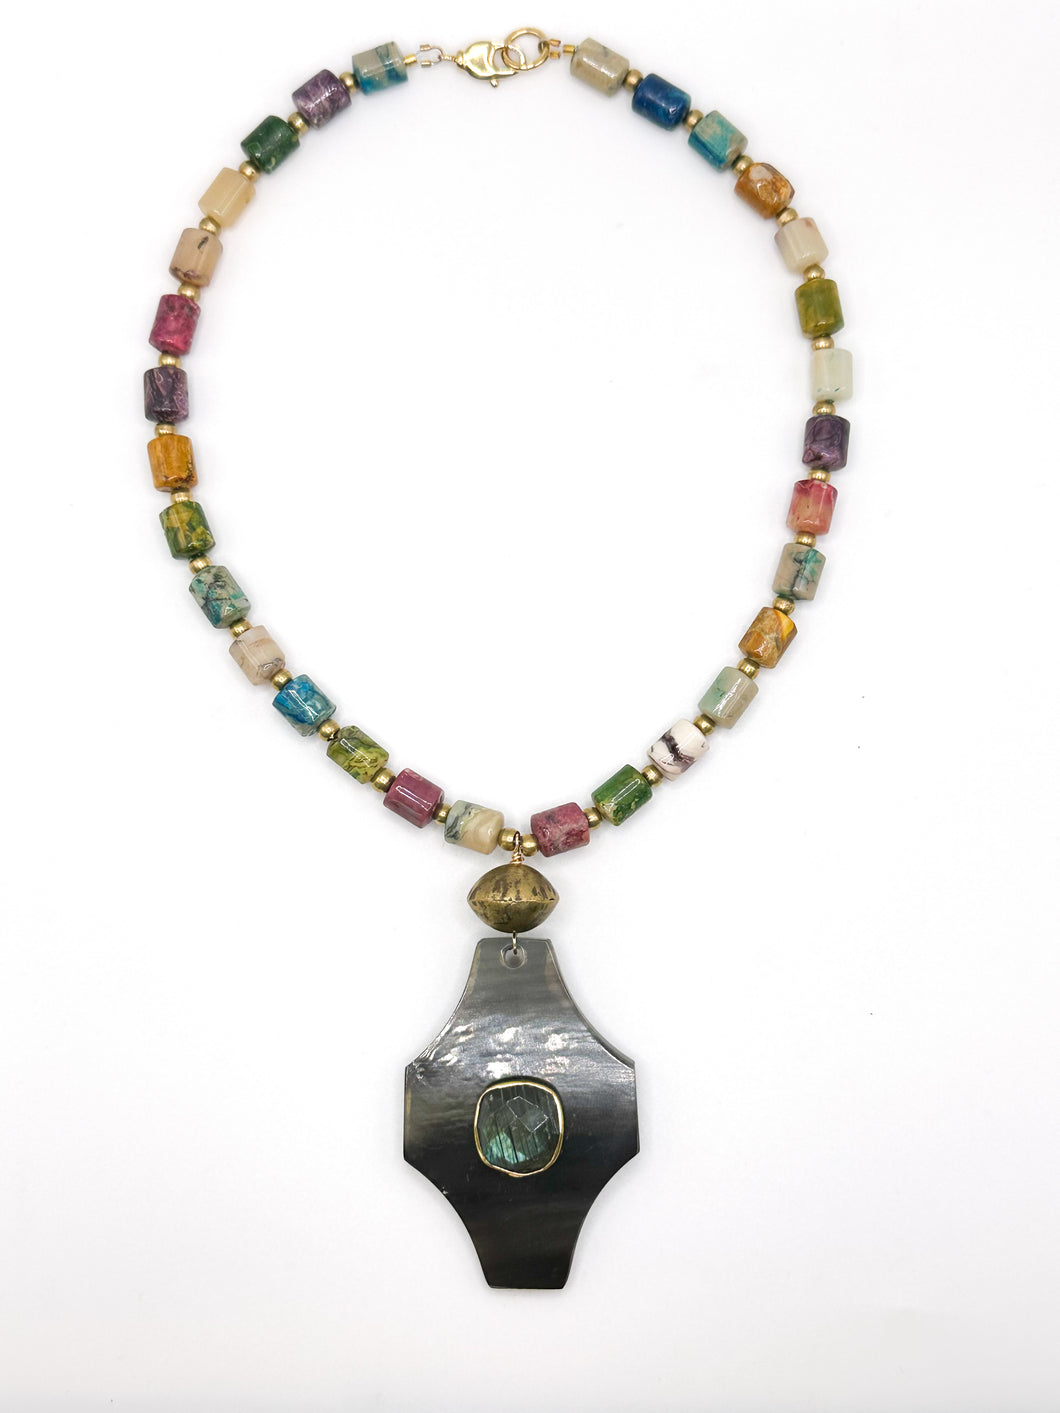 Jewel Agate Necklace with Horn Pendant